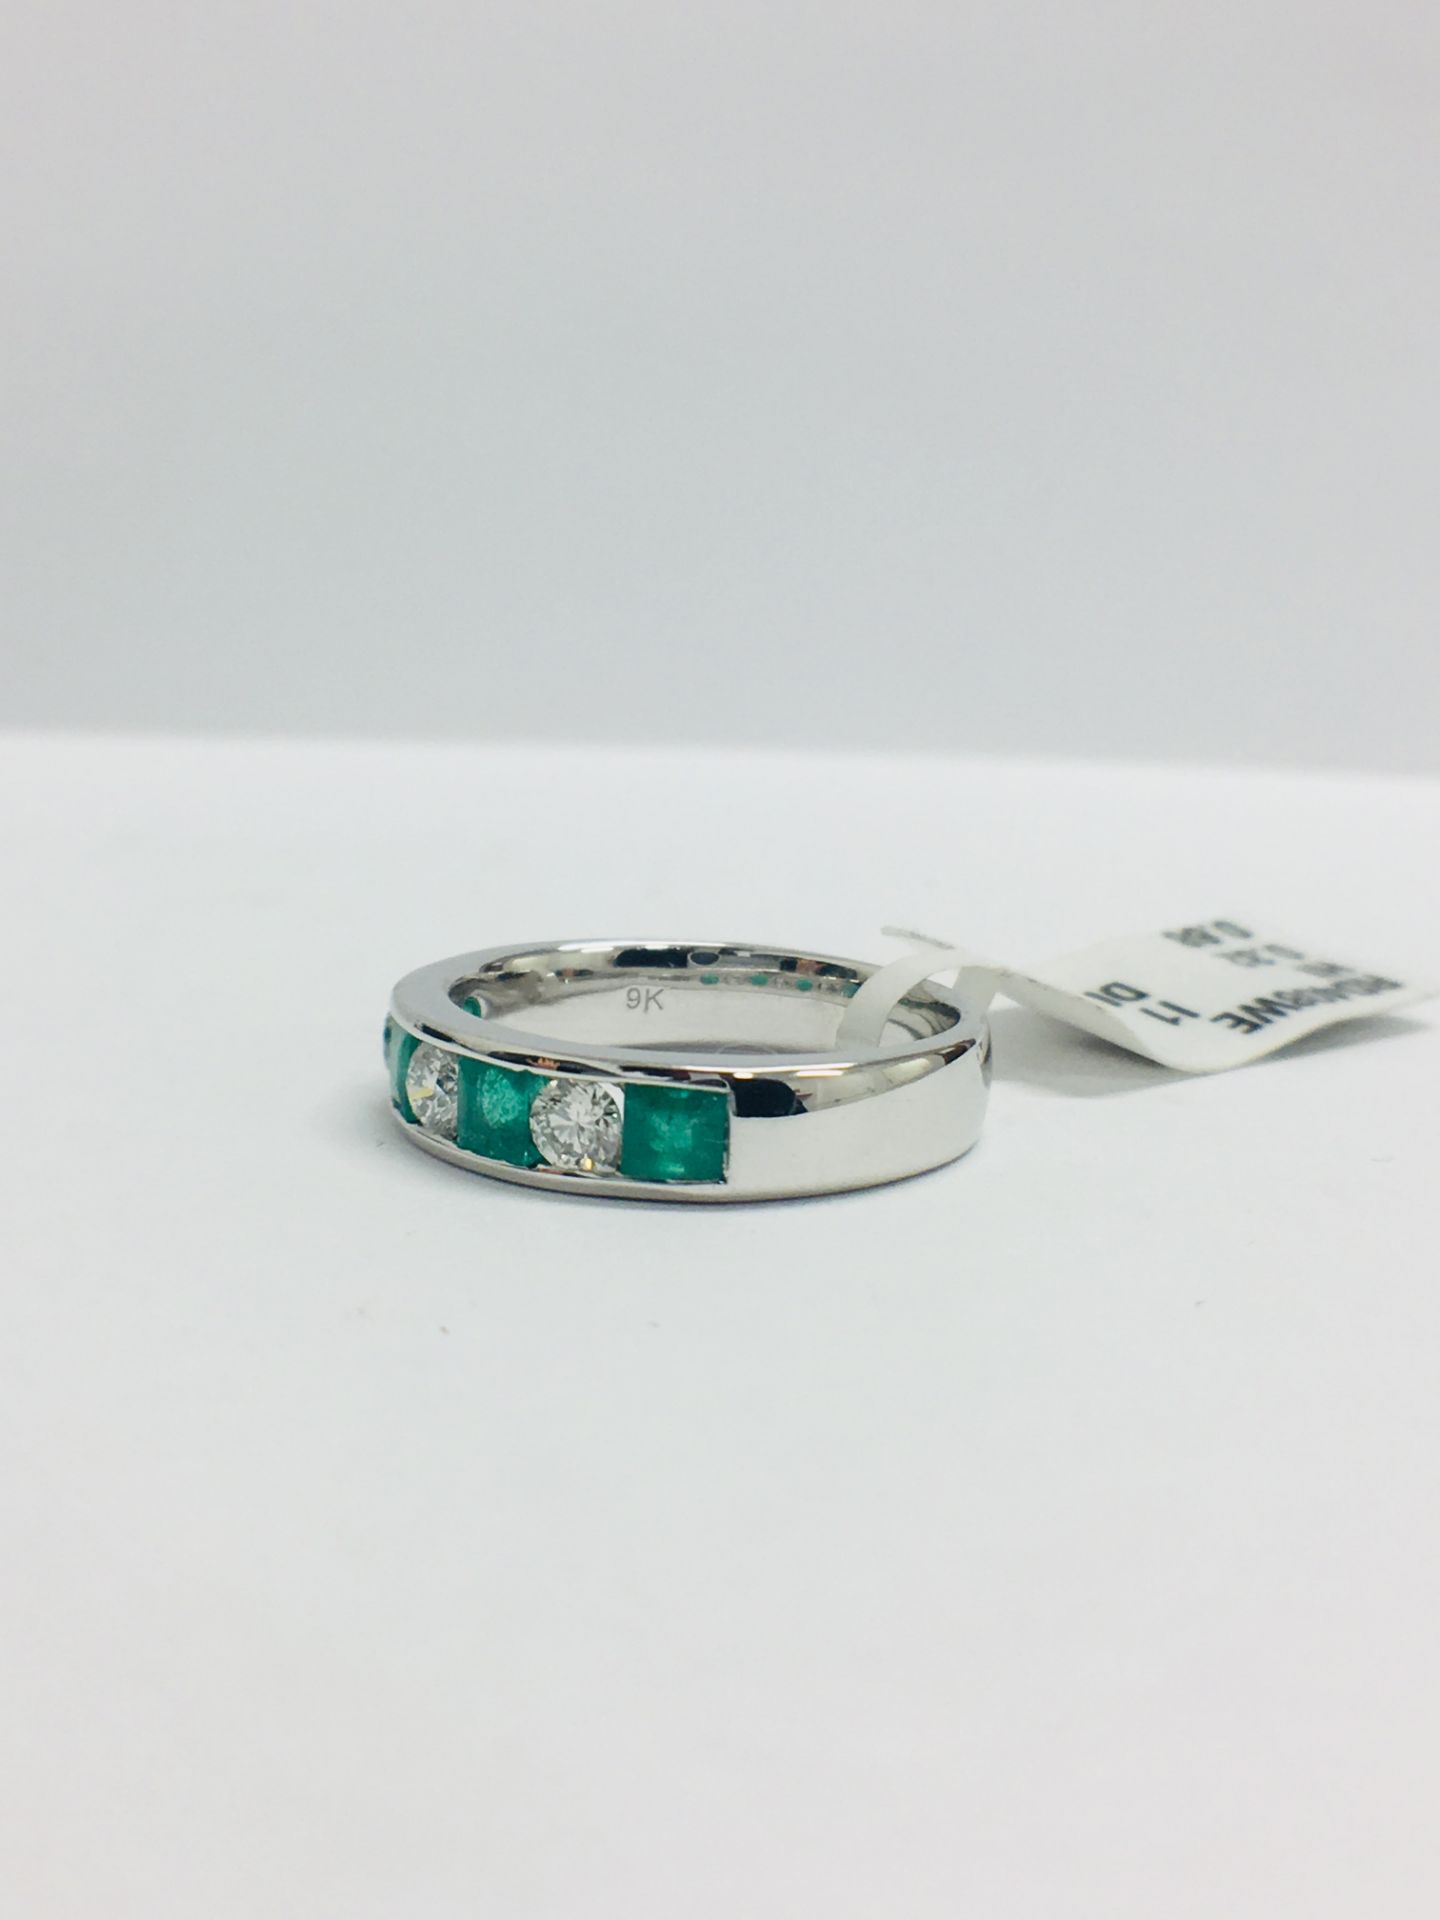 9ct White Gold Emerald Diamond Channel Set Ring - Image 3 of 13